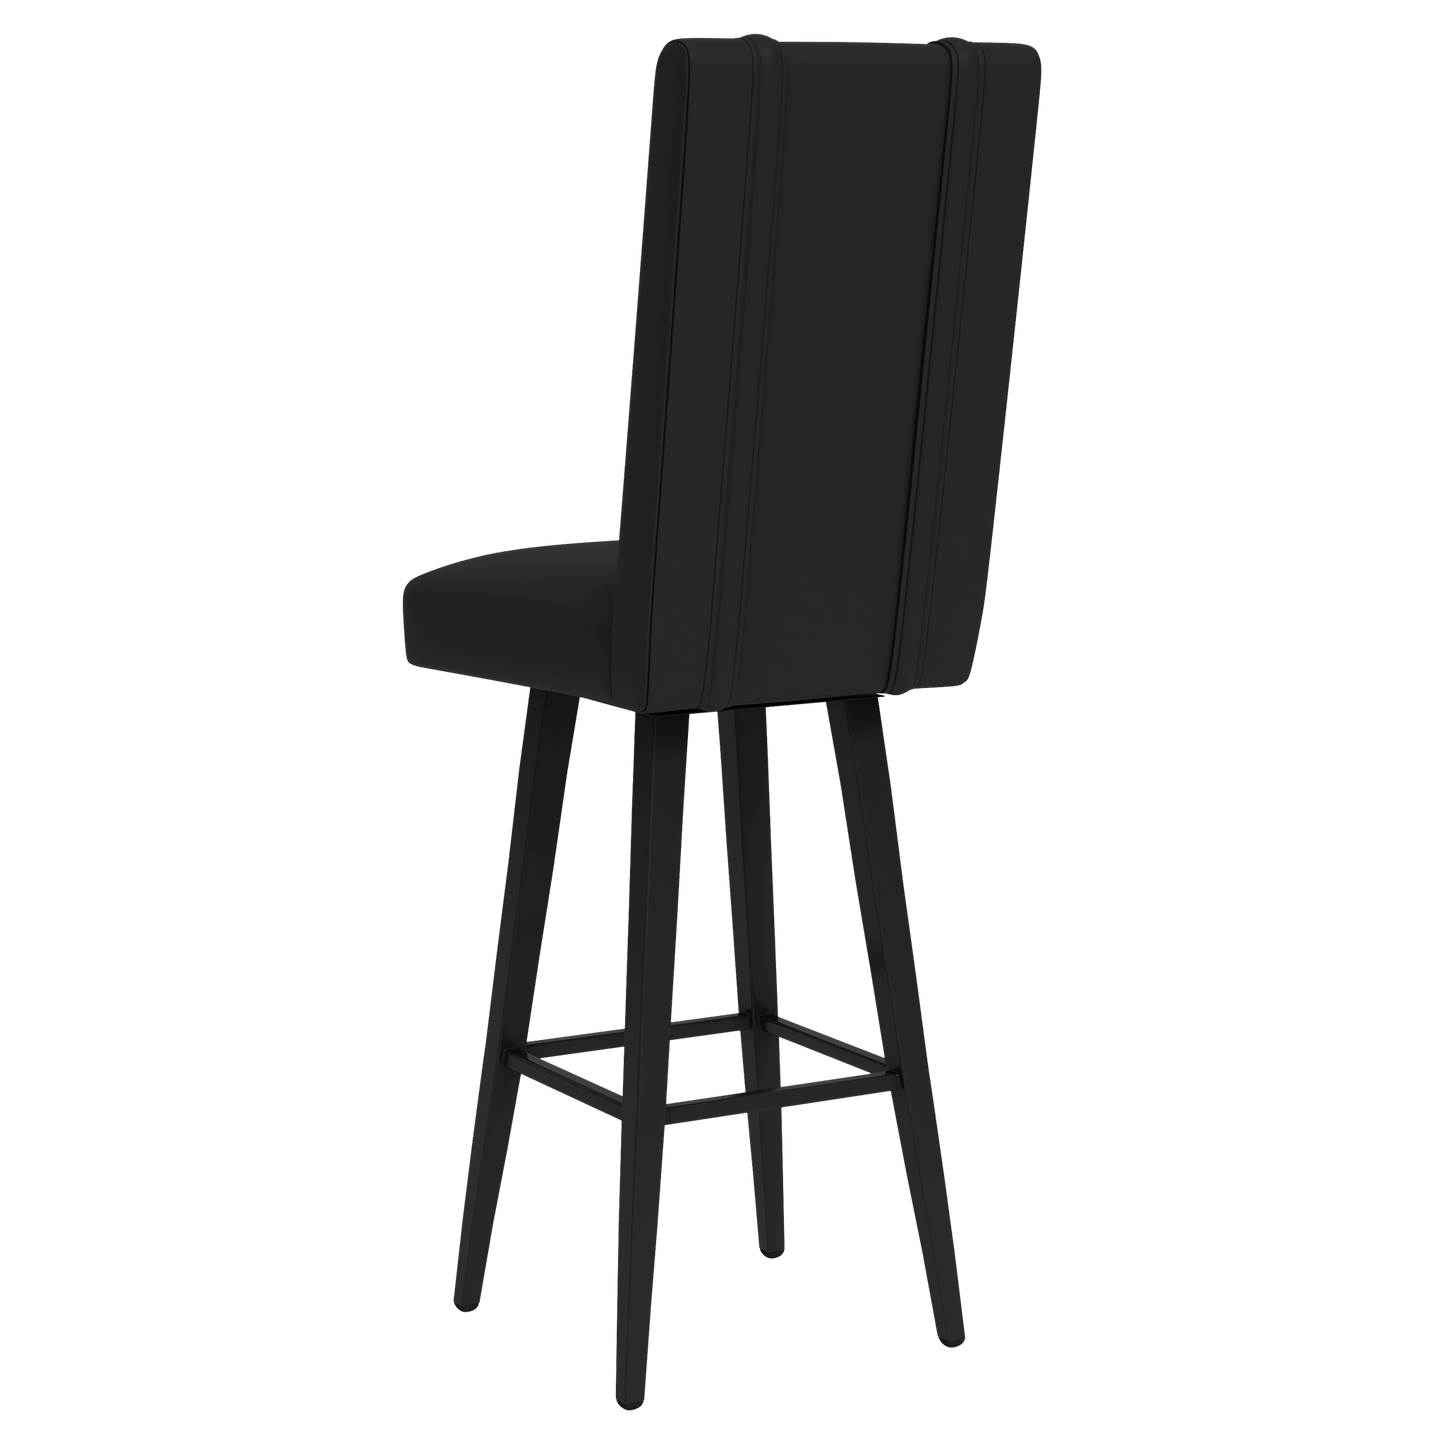 Swivel Bar Stool 2000 with Philadelphia 76ers GC [CAN ONLY BE SHIPPED TO PENNSYLVANIA]